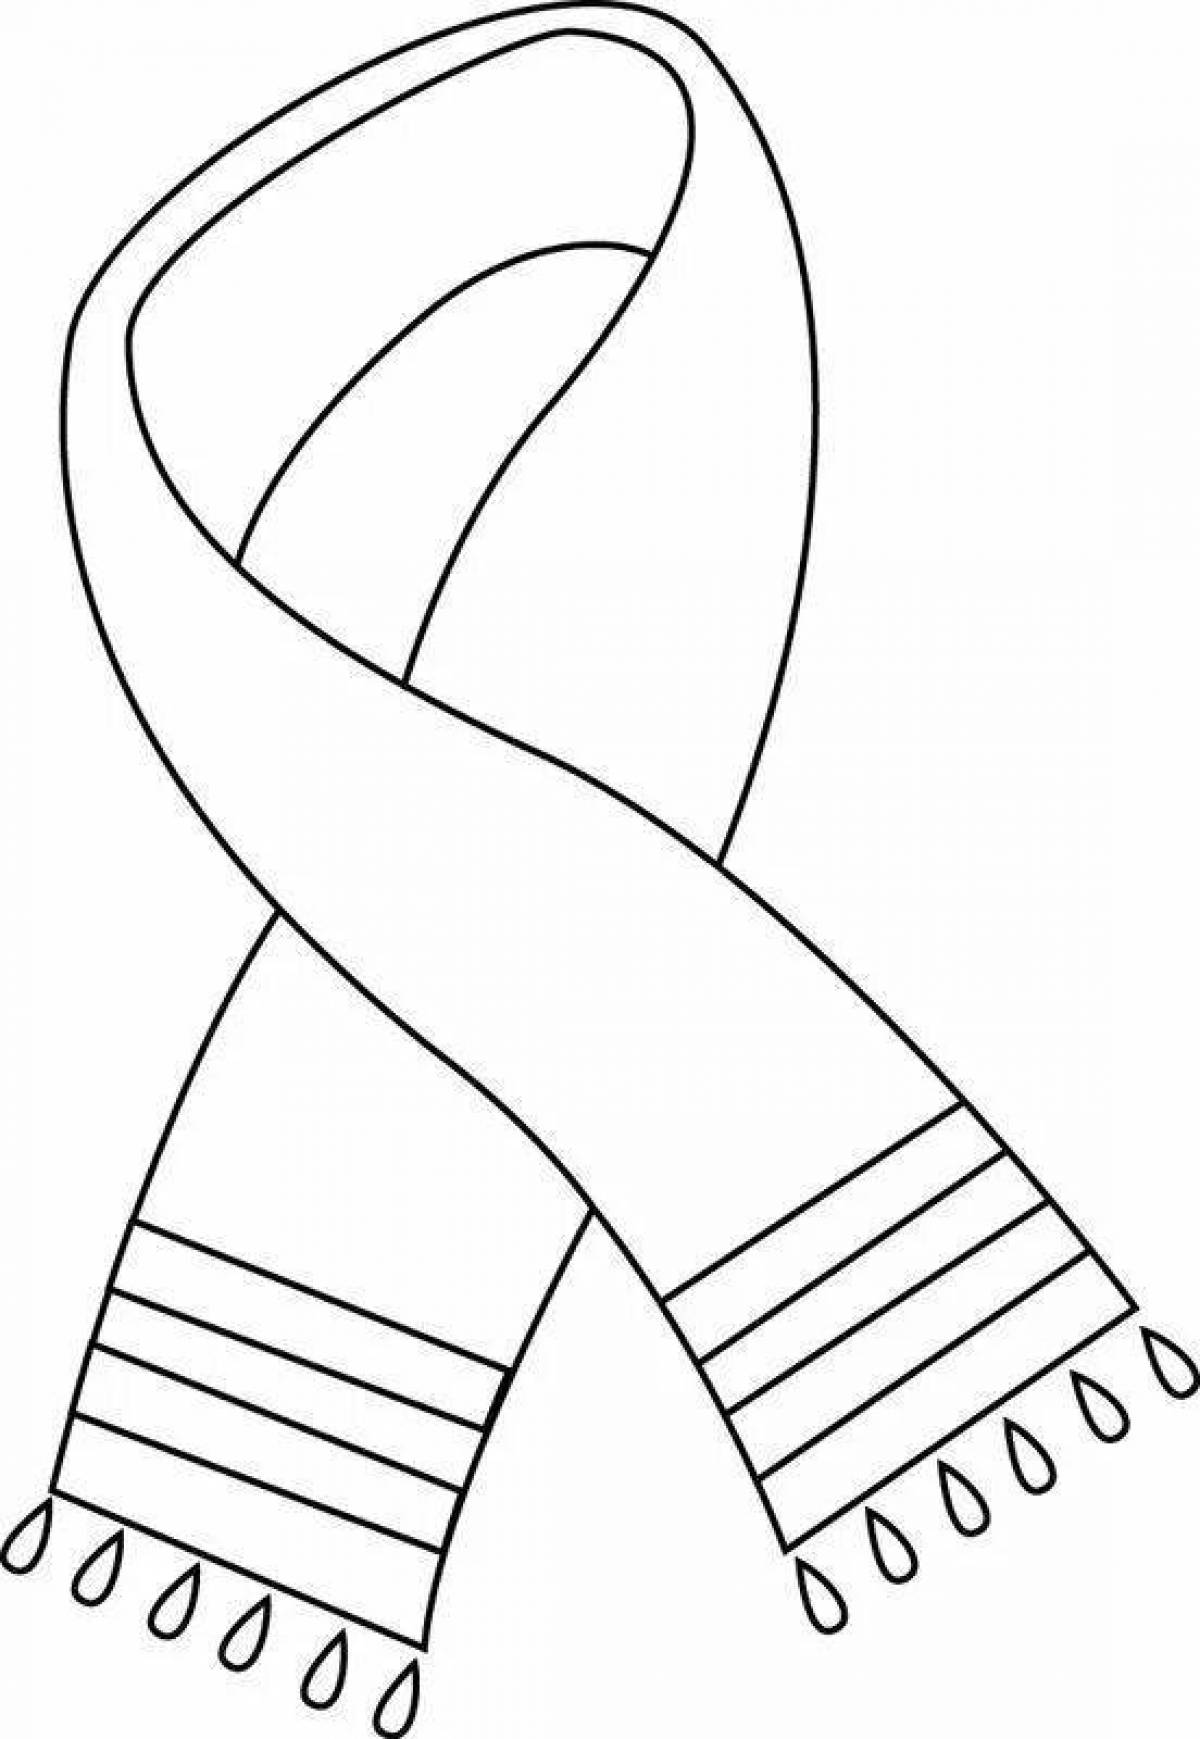 Children's coloring scarf for 2-3 year olds